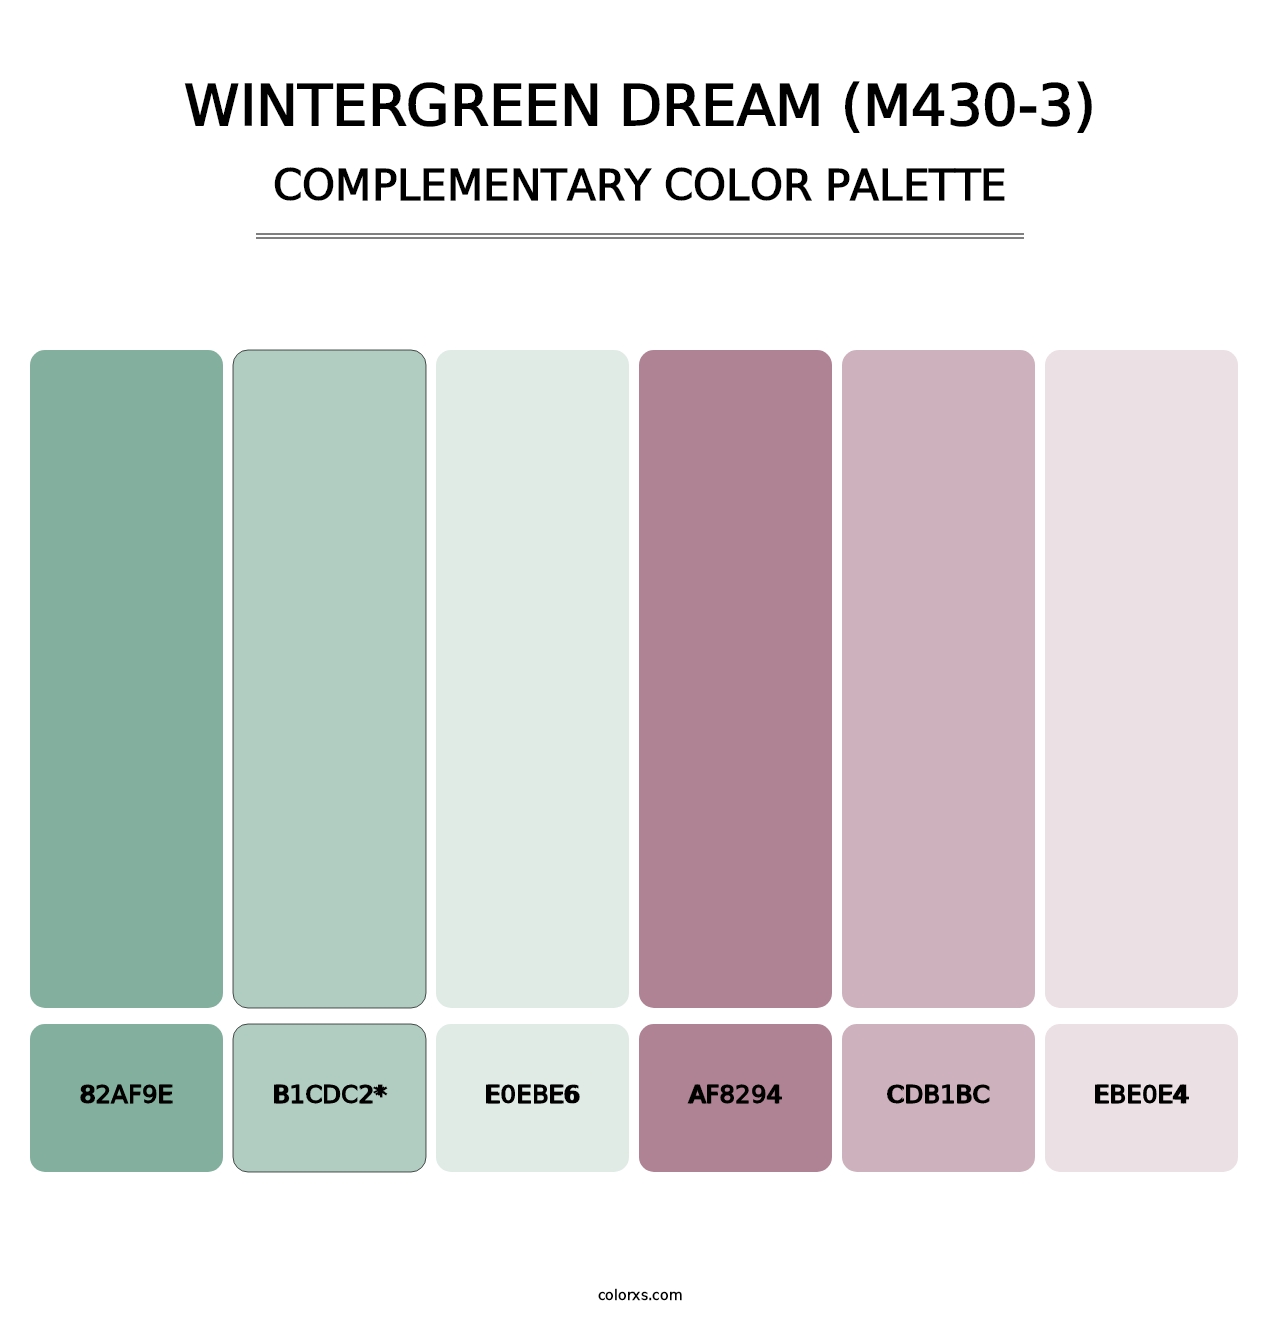 Wintergreen Dream (M430-3) - Complementary Color Palette